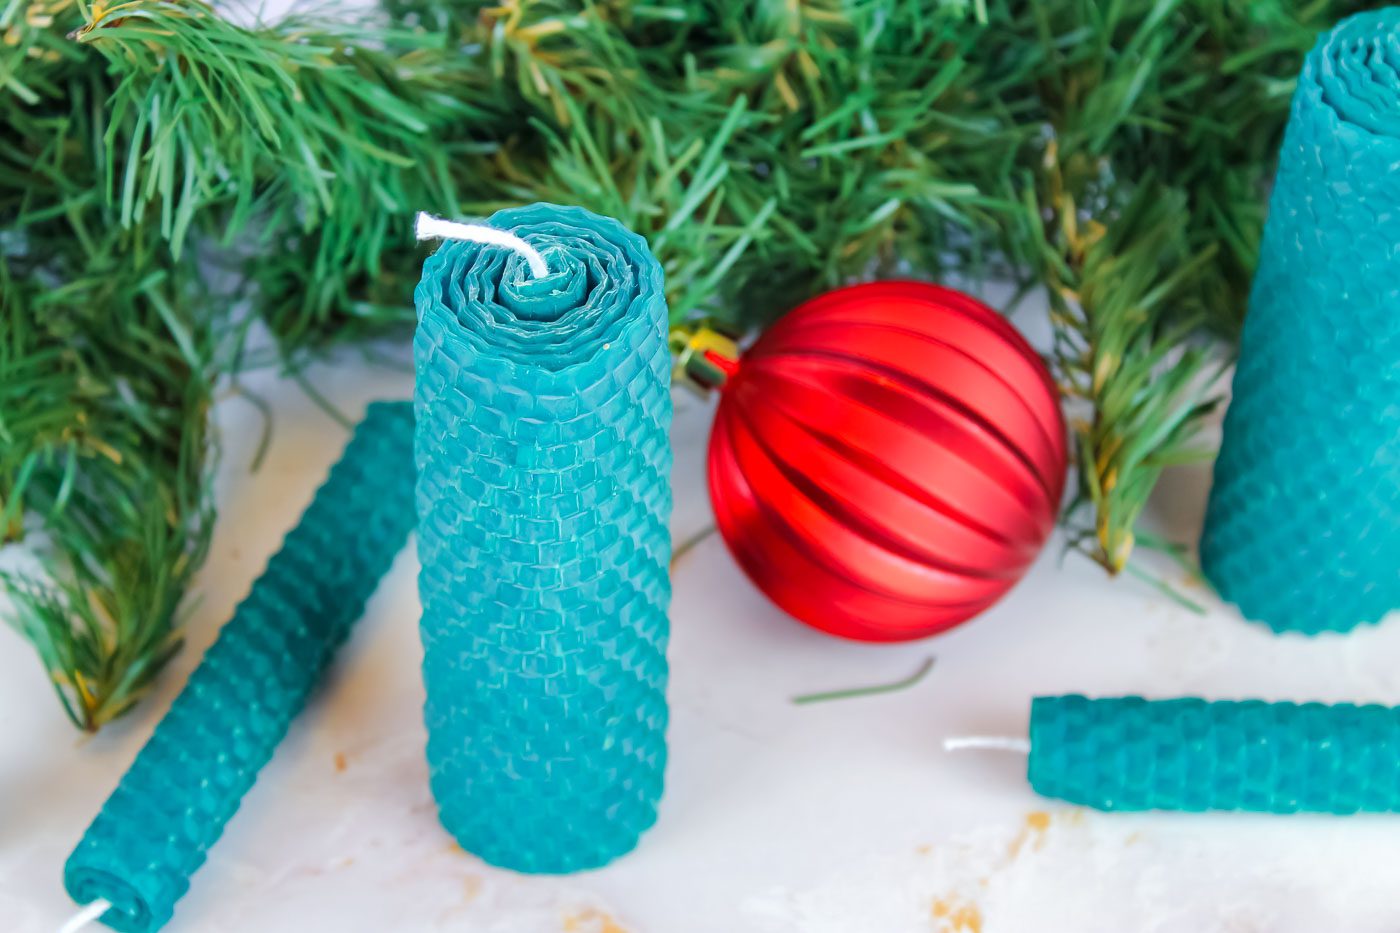 green rolled beeswax candles sitting in front of a red Christmas ornament and some pine greenery